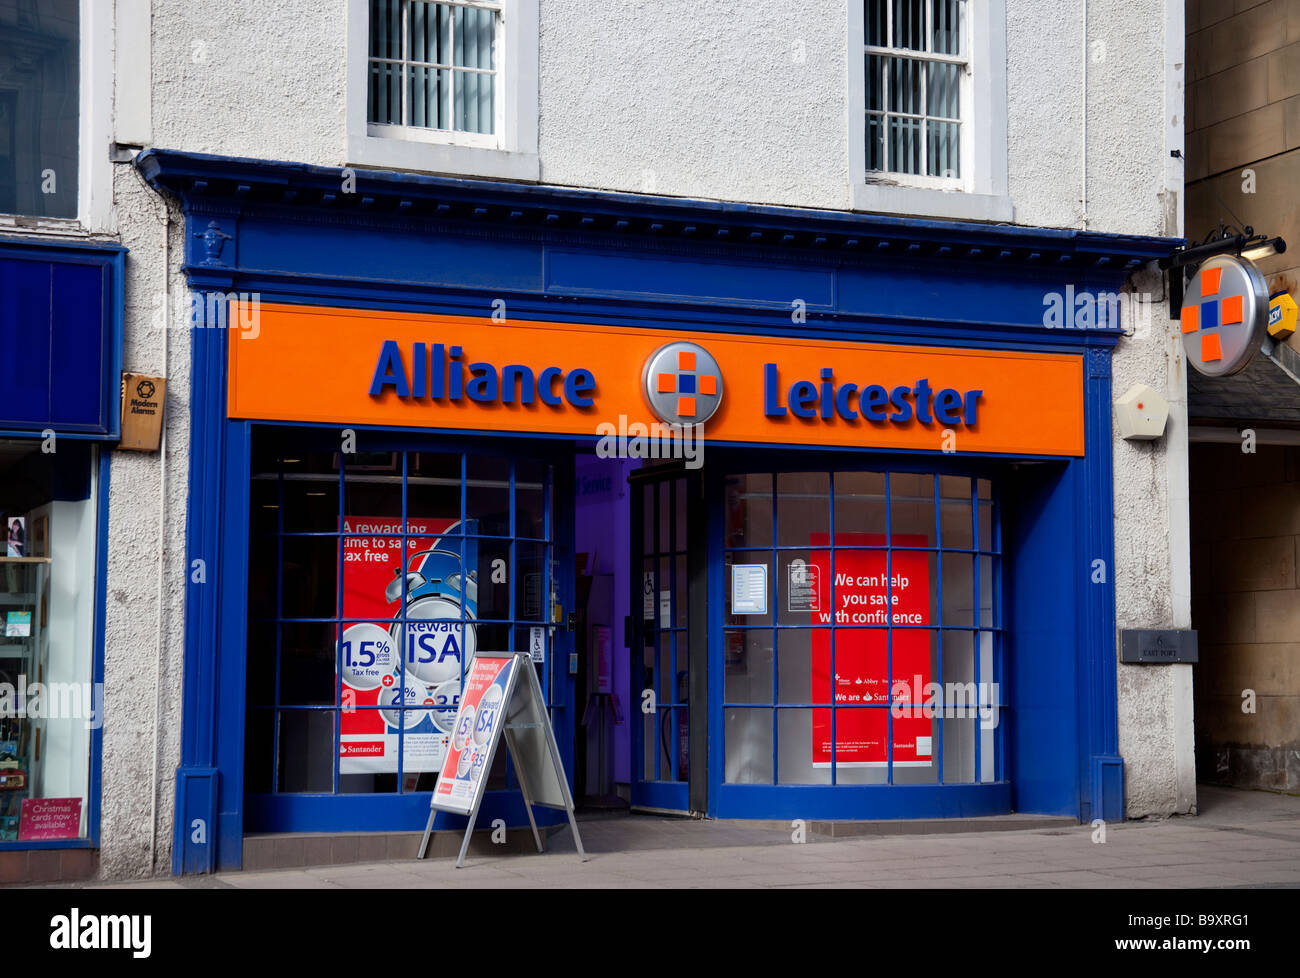 Alliance et Leicester Building Society, Dunfermline, Fife, Scotland, UK, Europe Banque D'Images